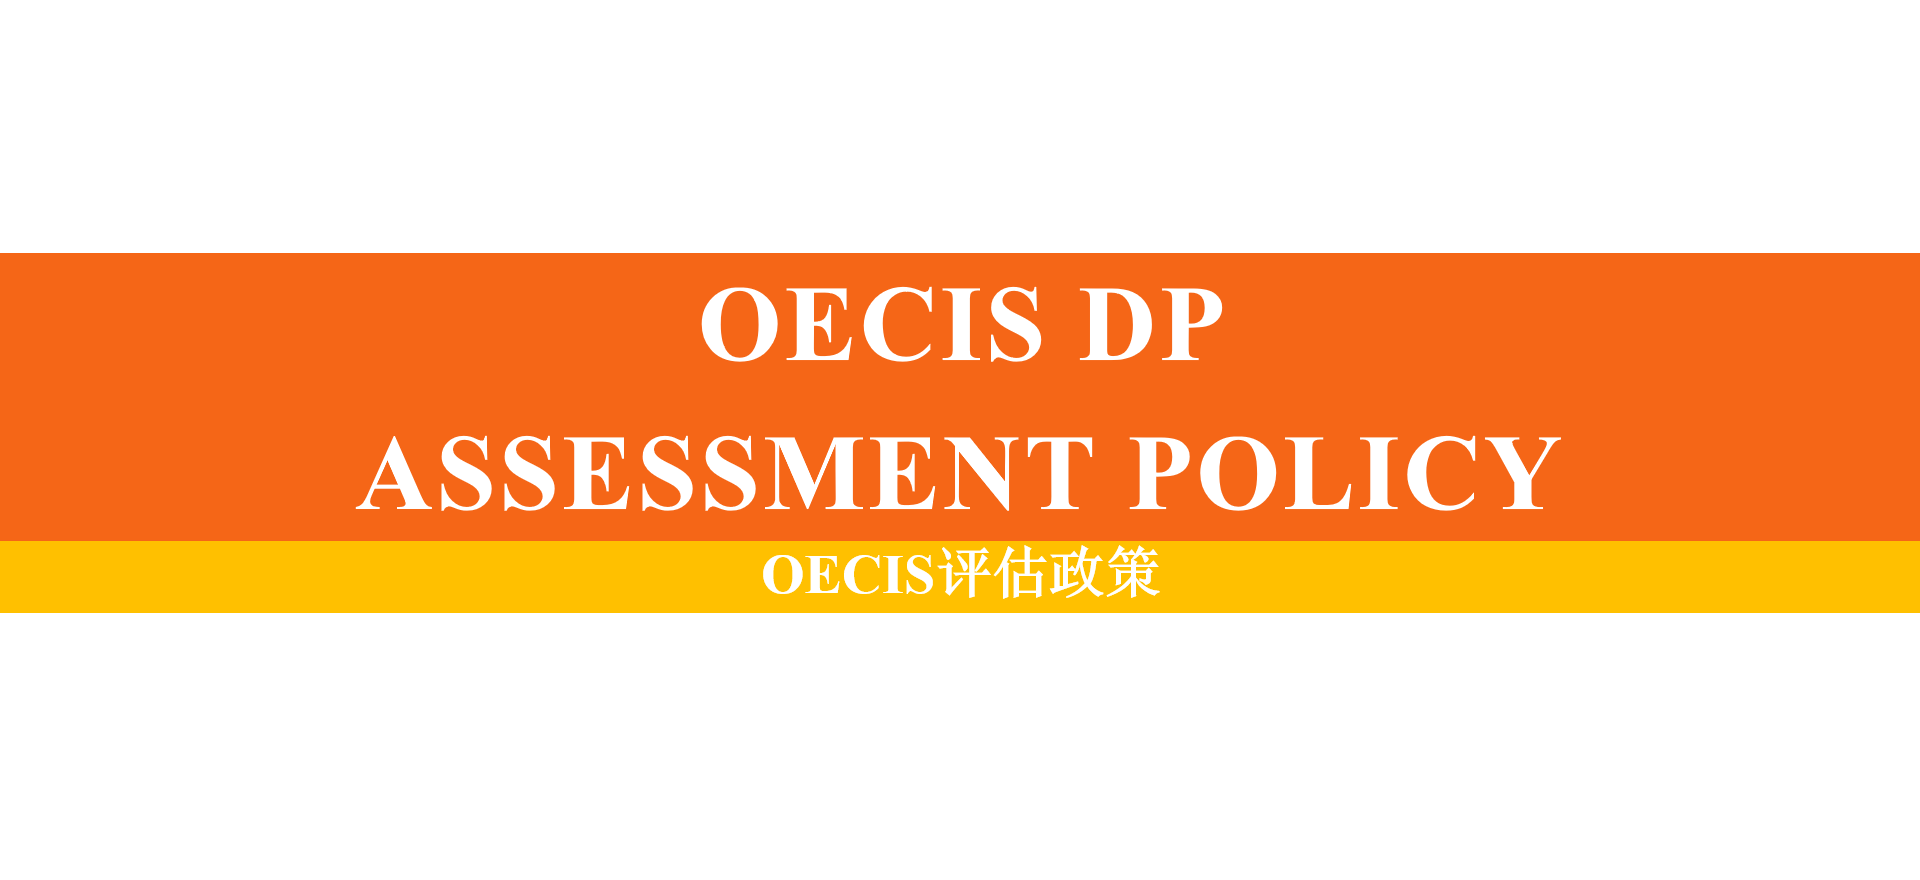 OECIS DP Assessment Policy OECIS评估政策   